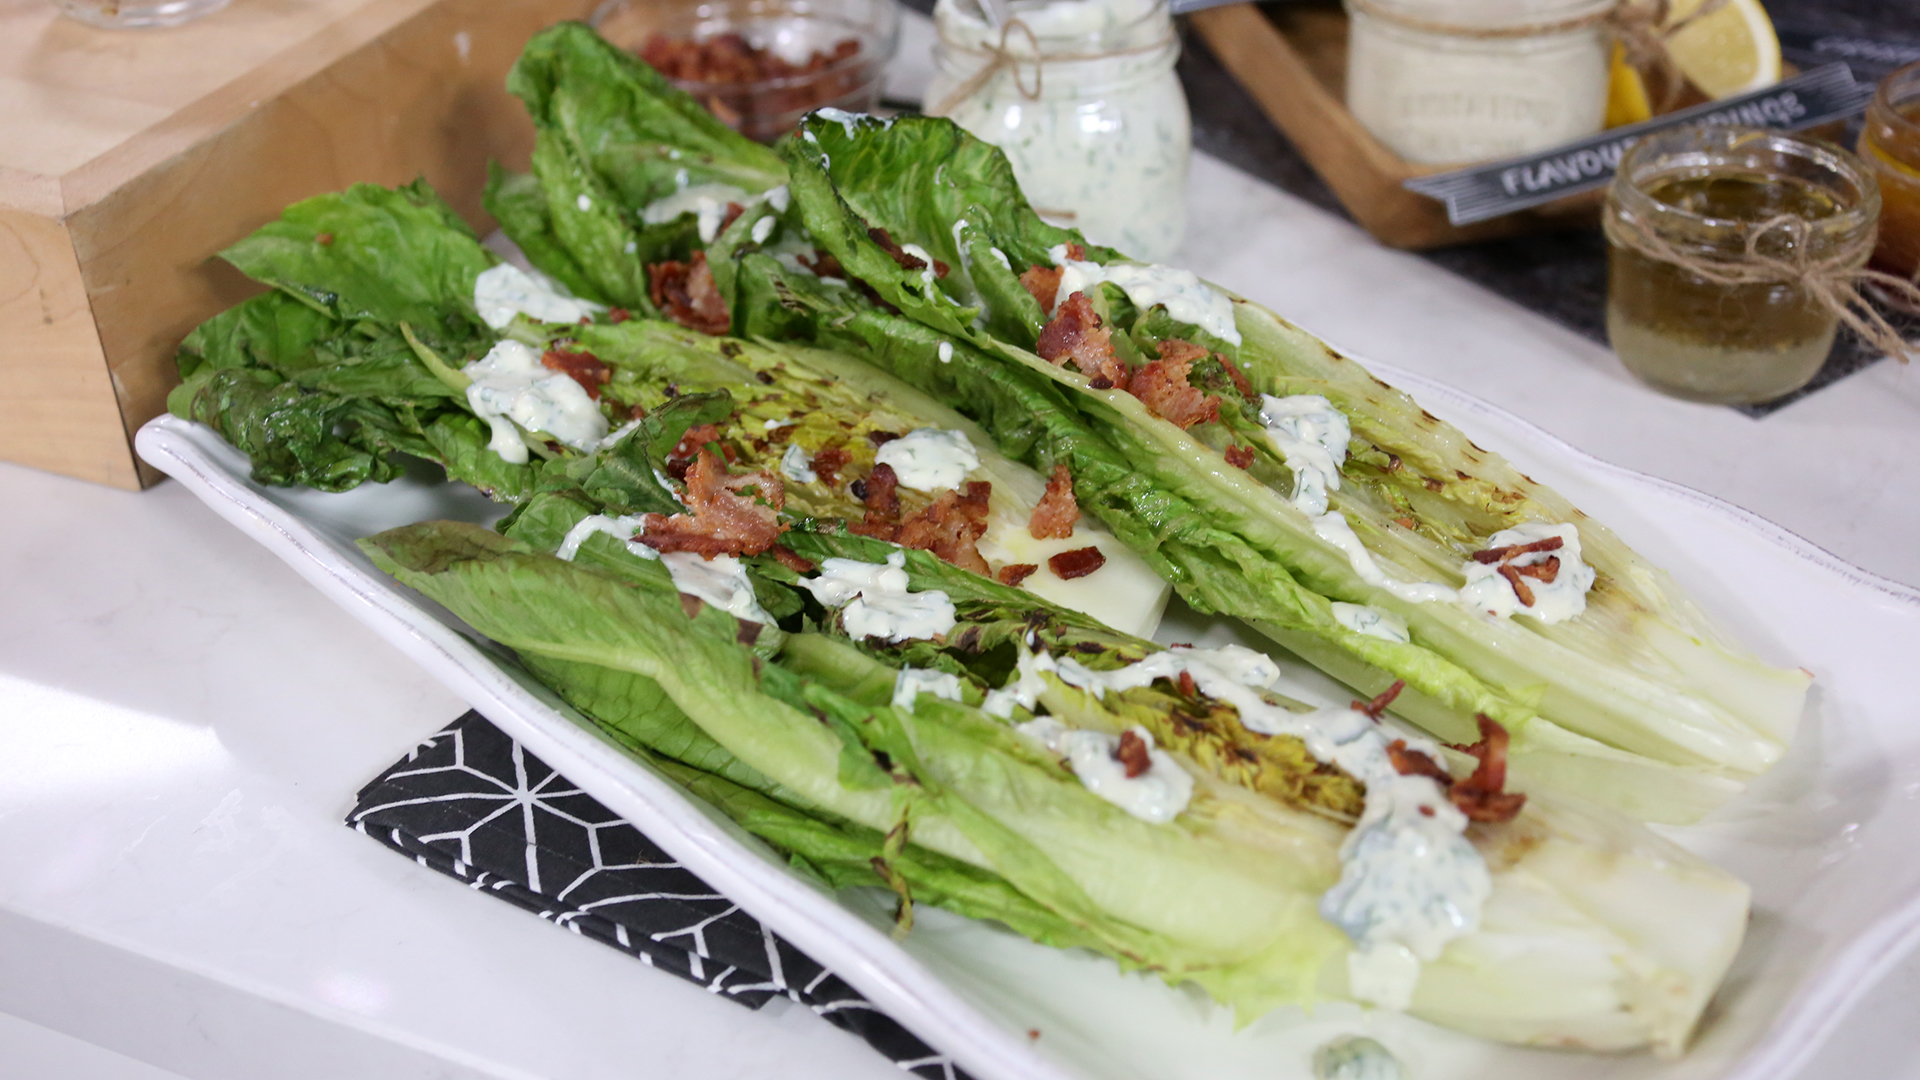 Grilled romaine salad with creamy blue cheese dressing